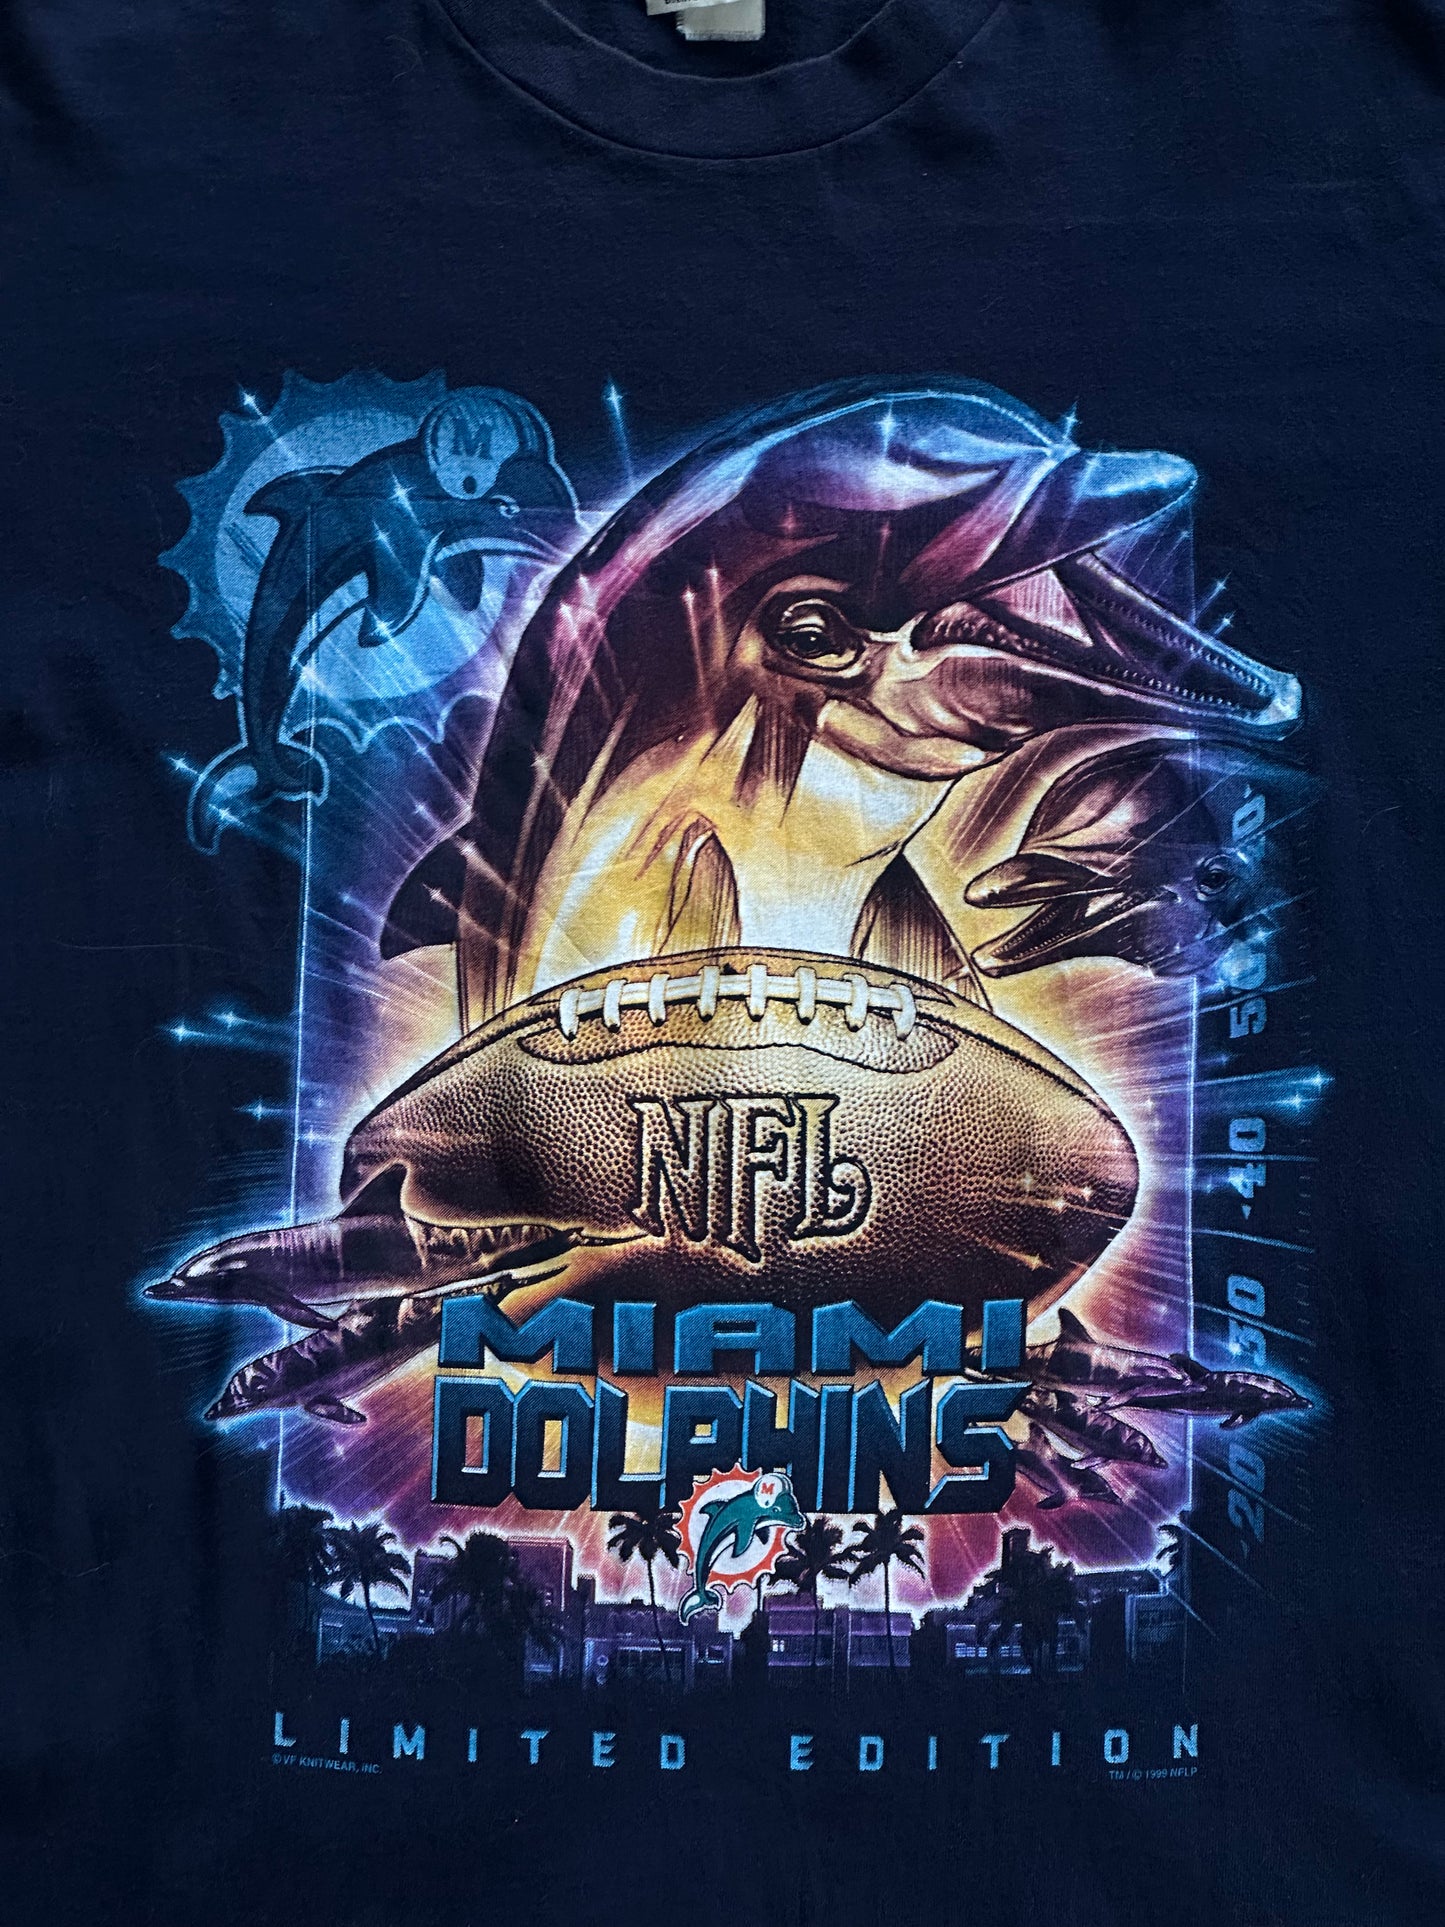 Vintage Miami Dolphins Limited Edition T-shirt